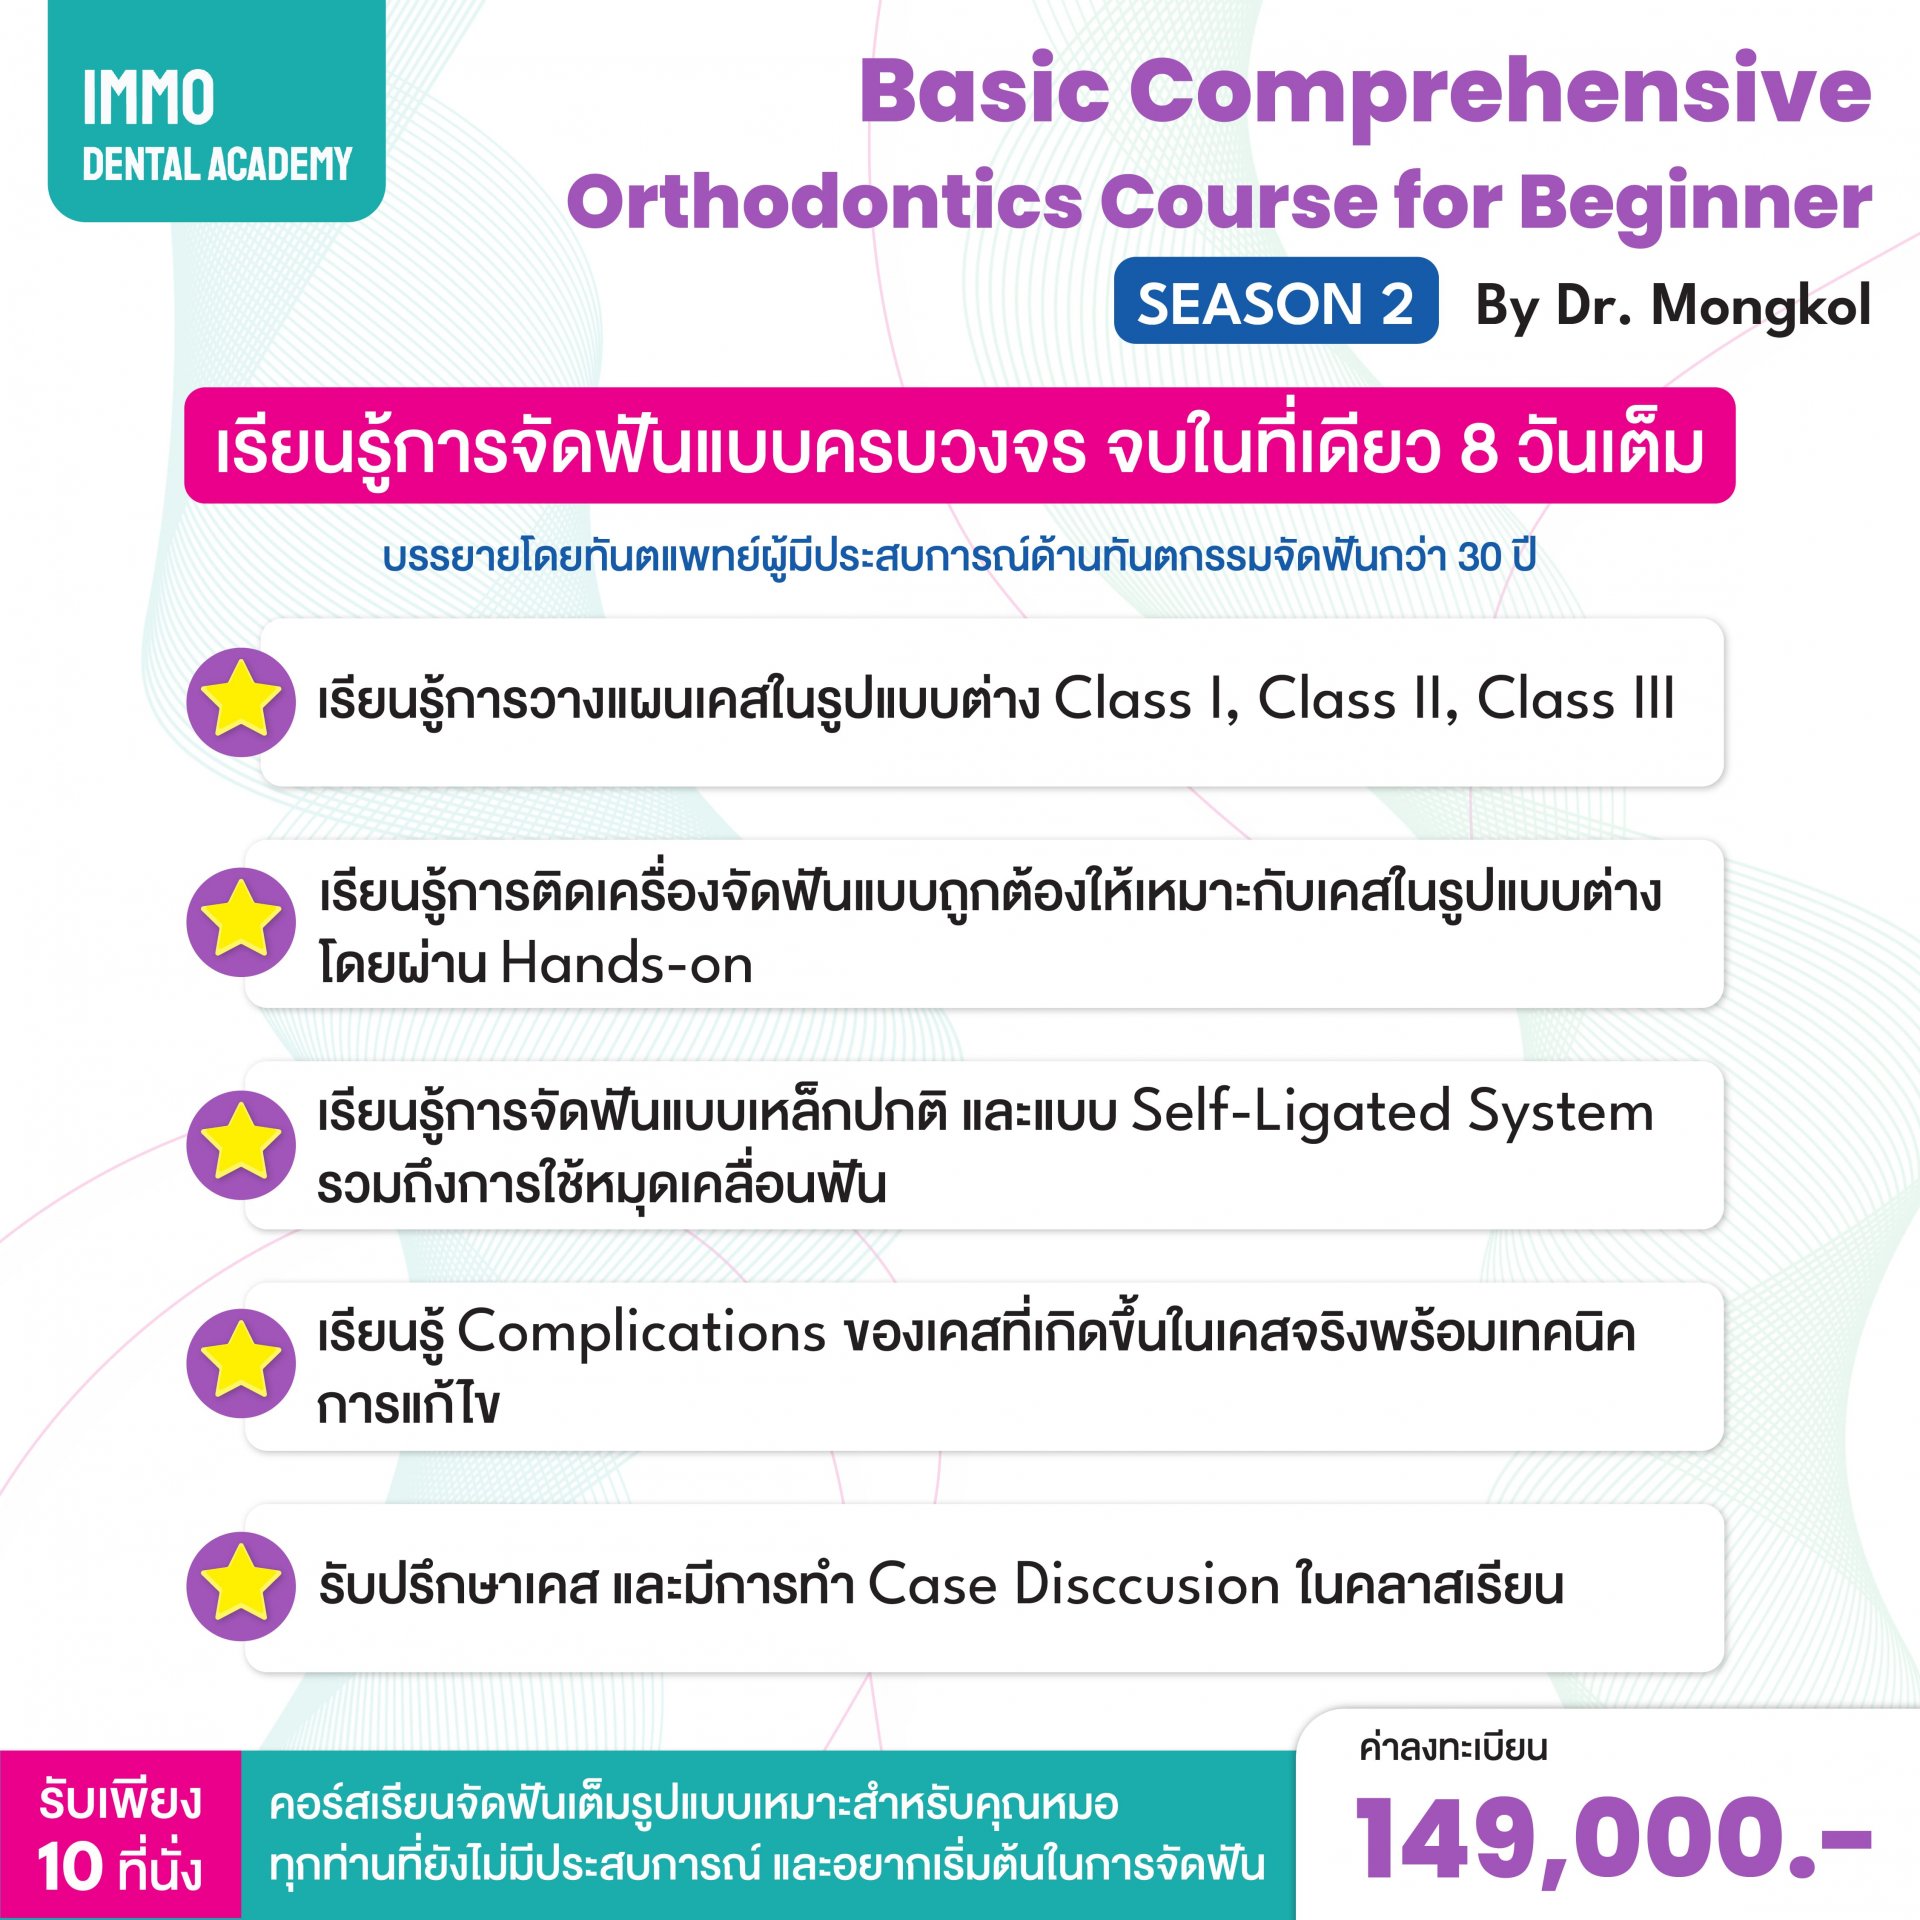 Basic Comprehensive Orthodontics Course For Beginner By Dr.Mongkol SS2